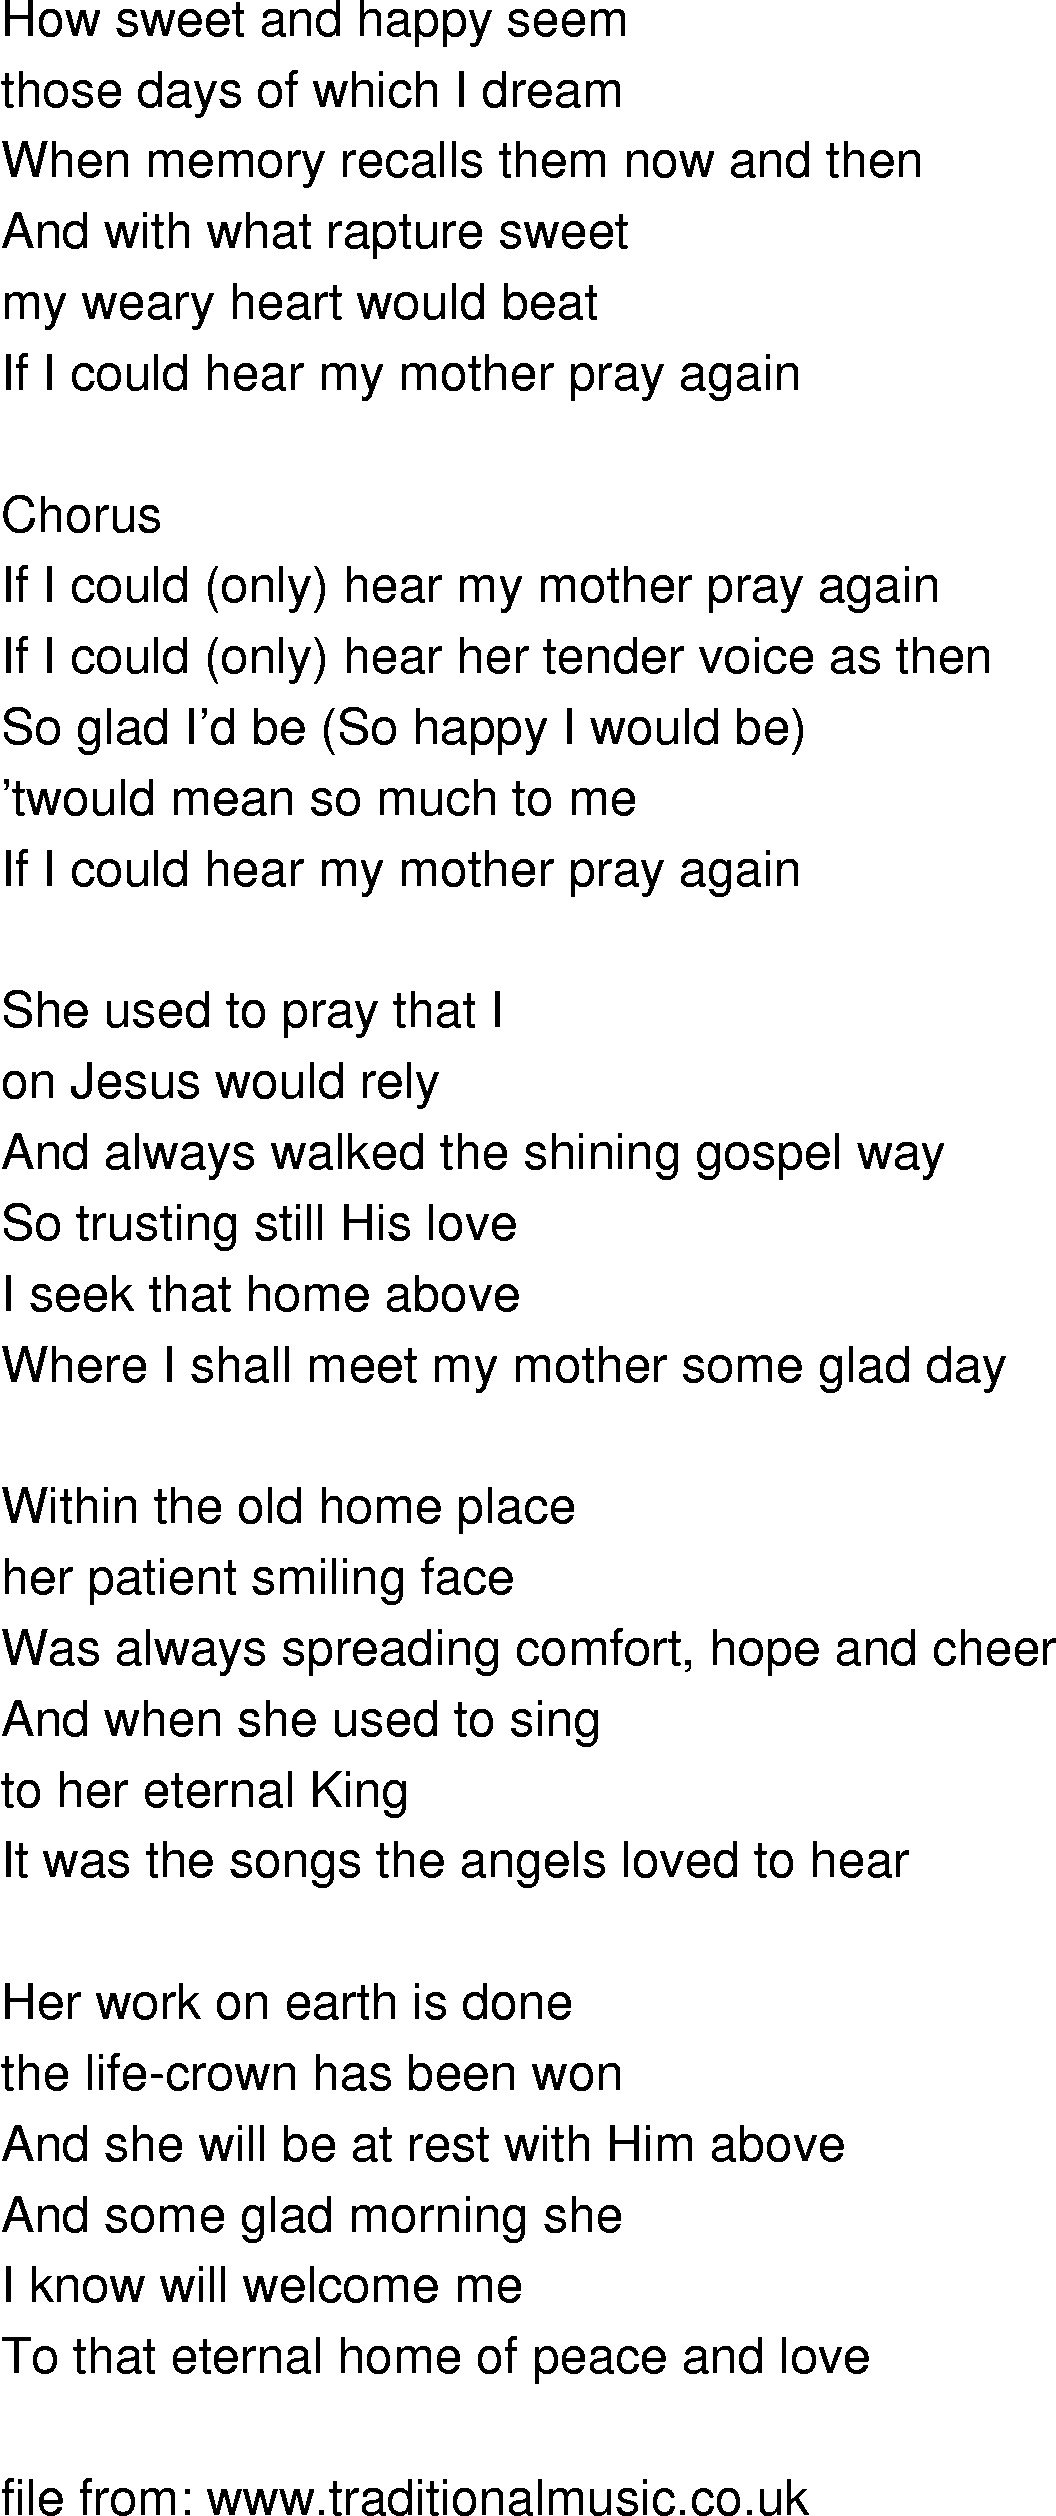 Old-Time (oldtimey) Song Lyrics - if i could hear my mother pray again